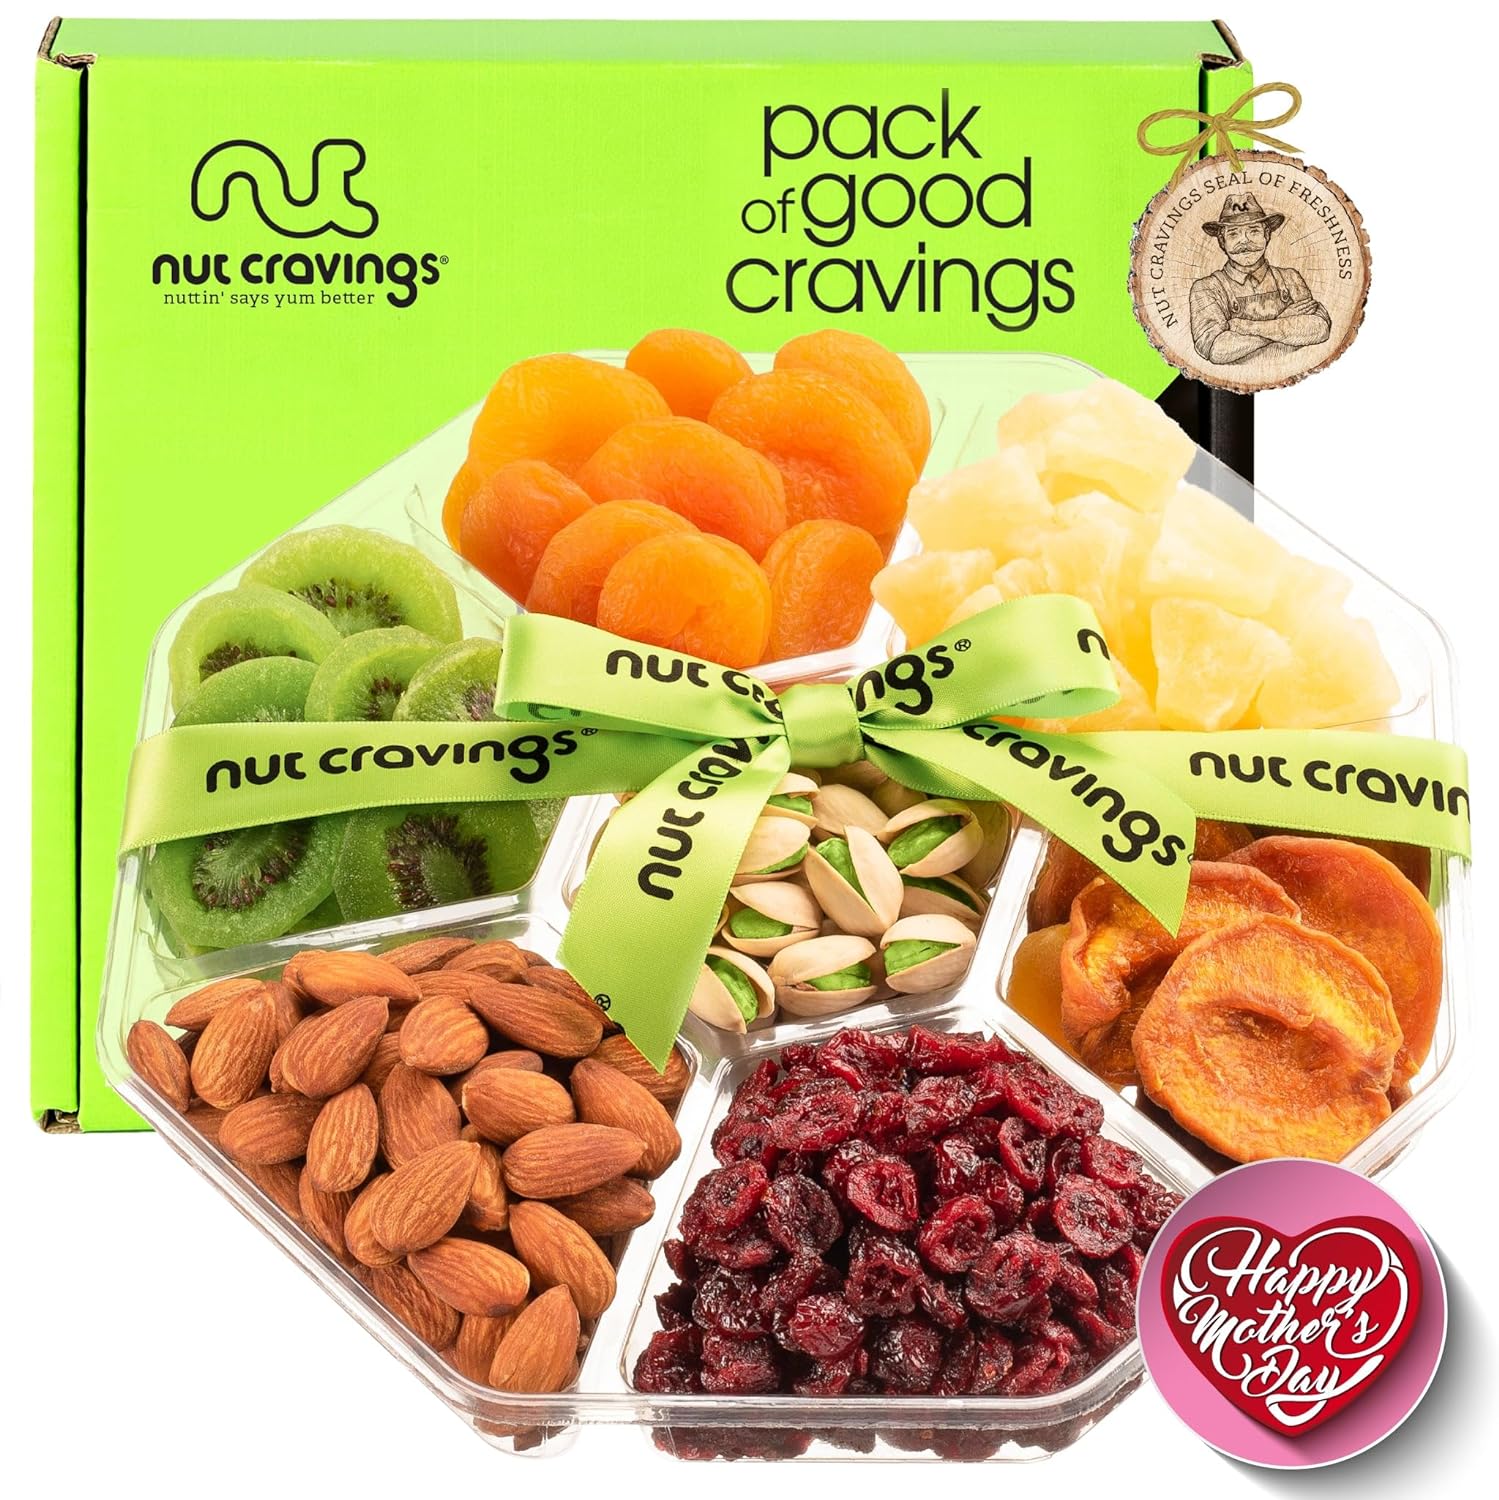 Nut Cravings Gourmet Collection - Mothers Day Dried Fruit & Mixed Nuts Gift Basket + Green Ribbon (7 Assortments, 1 LB) Arrangement Platter, Birthday Care Package - Healthy Kosher